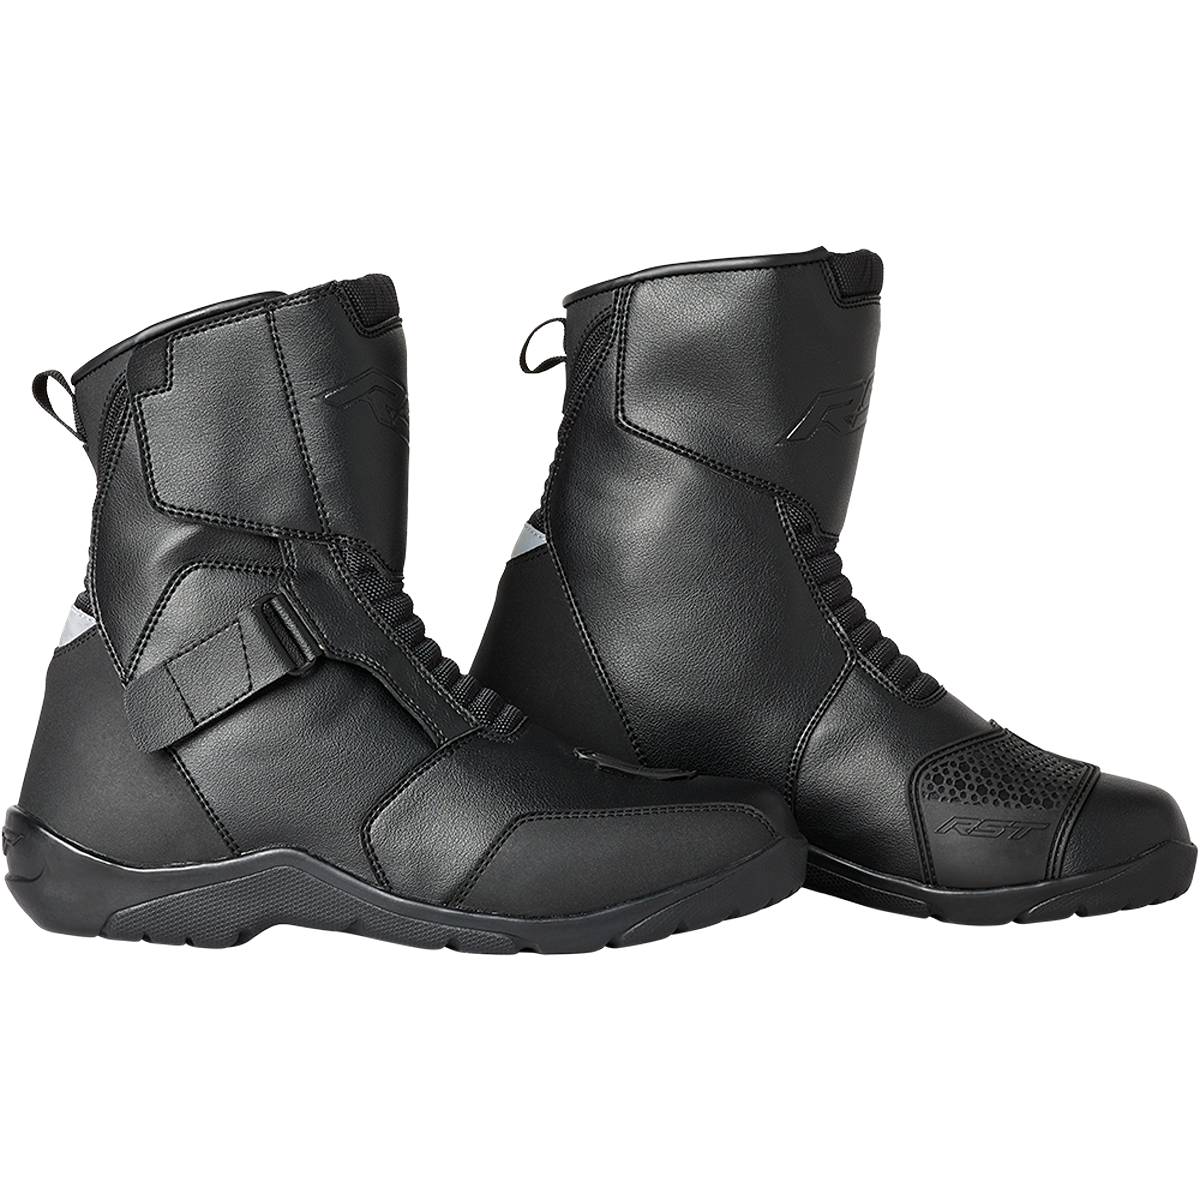 Image of RST Axiom Mid Waterproof Boots Black Size 43 ID 5056558118556